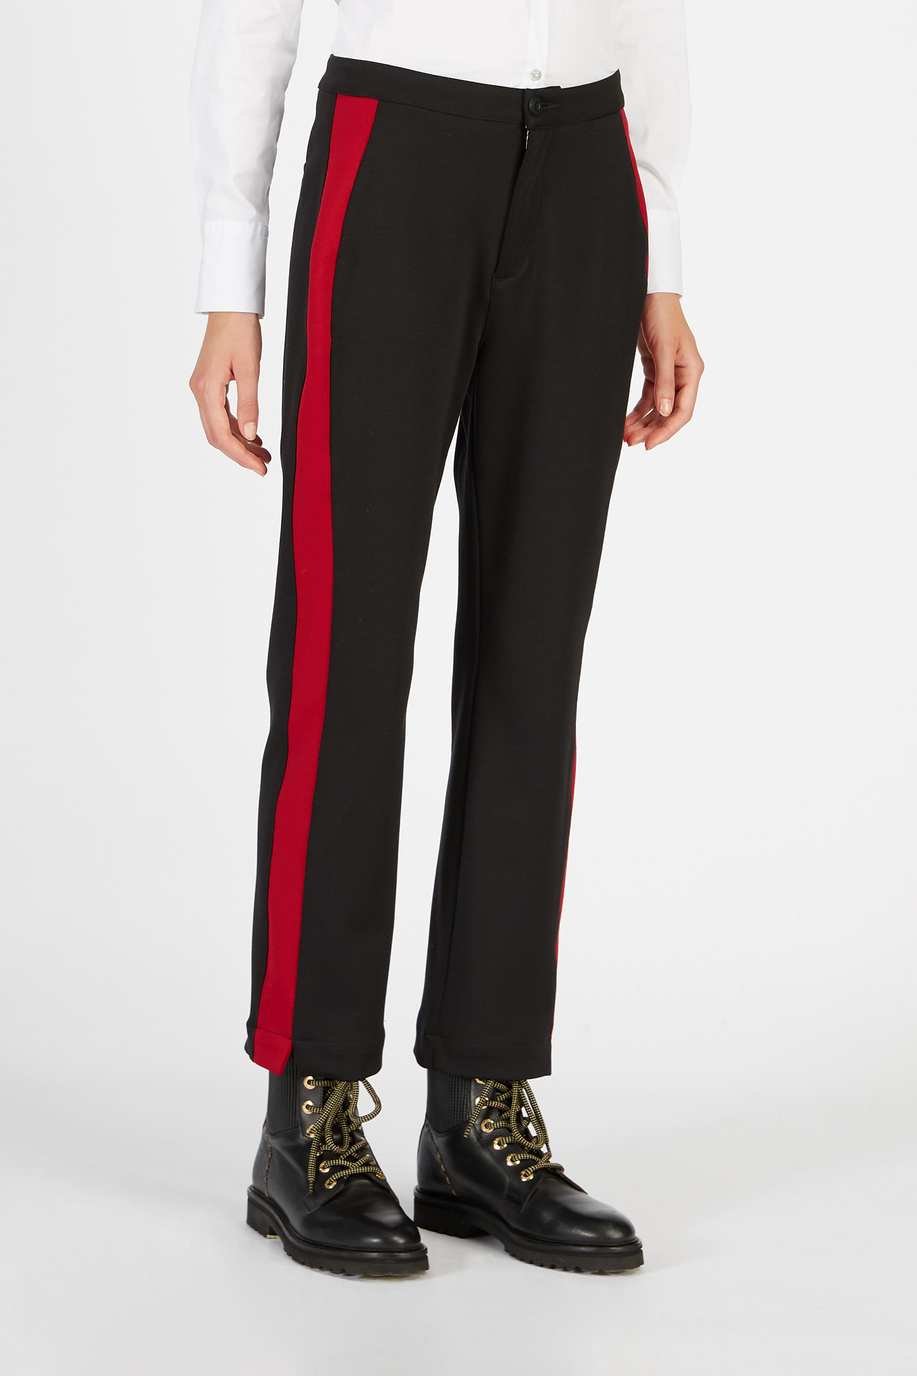 Women’s high-waisted trousers with narrow bottom - Party season for her | La Martina - Official Online Shop